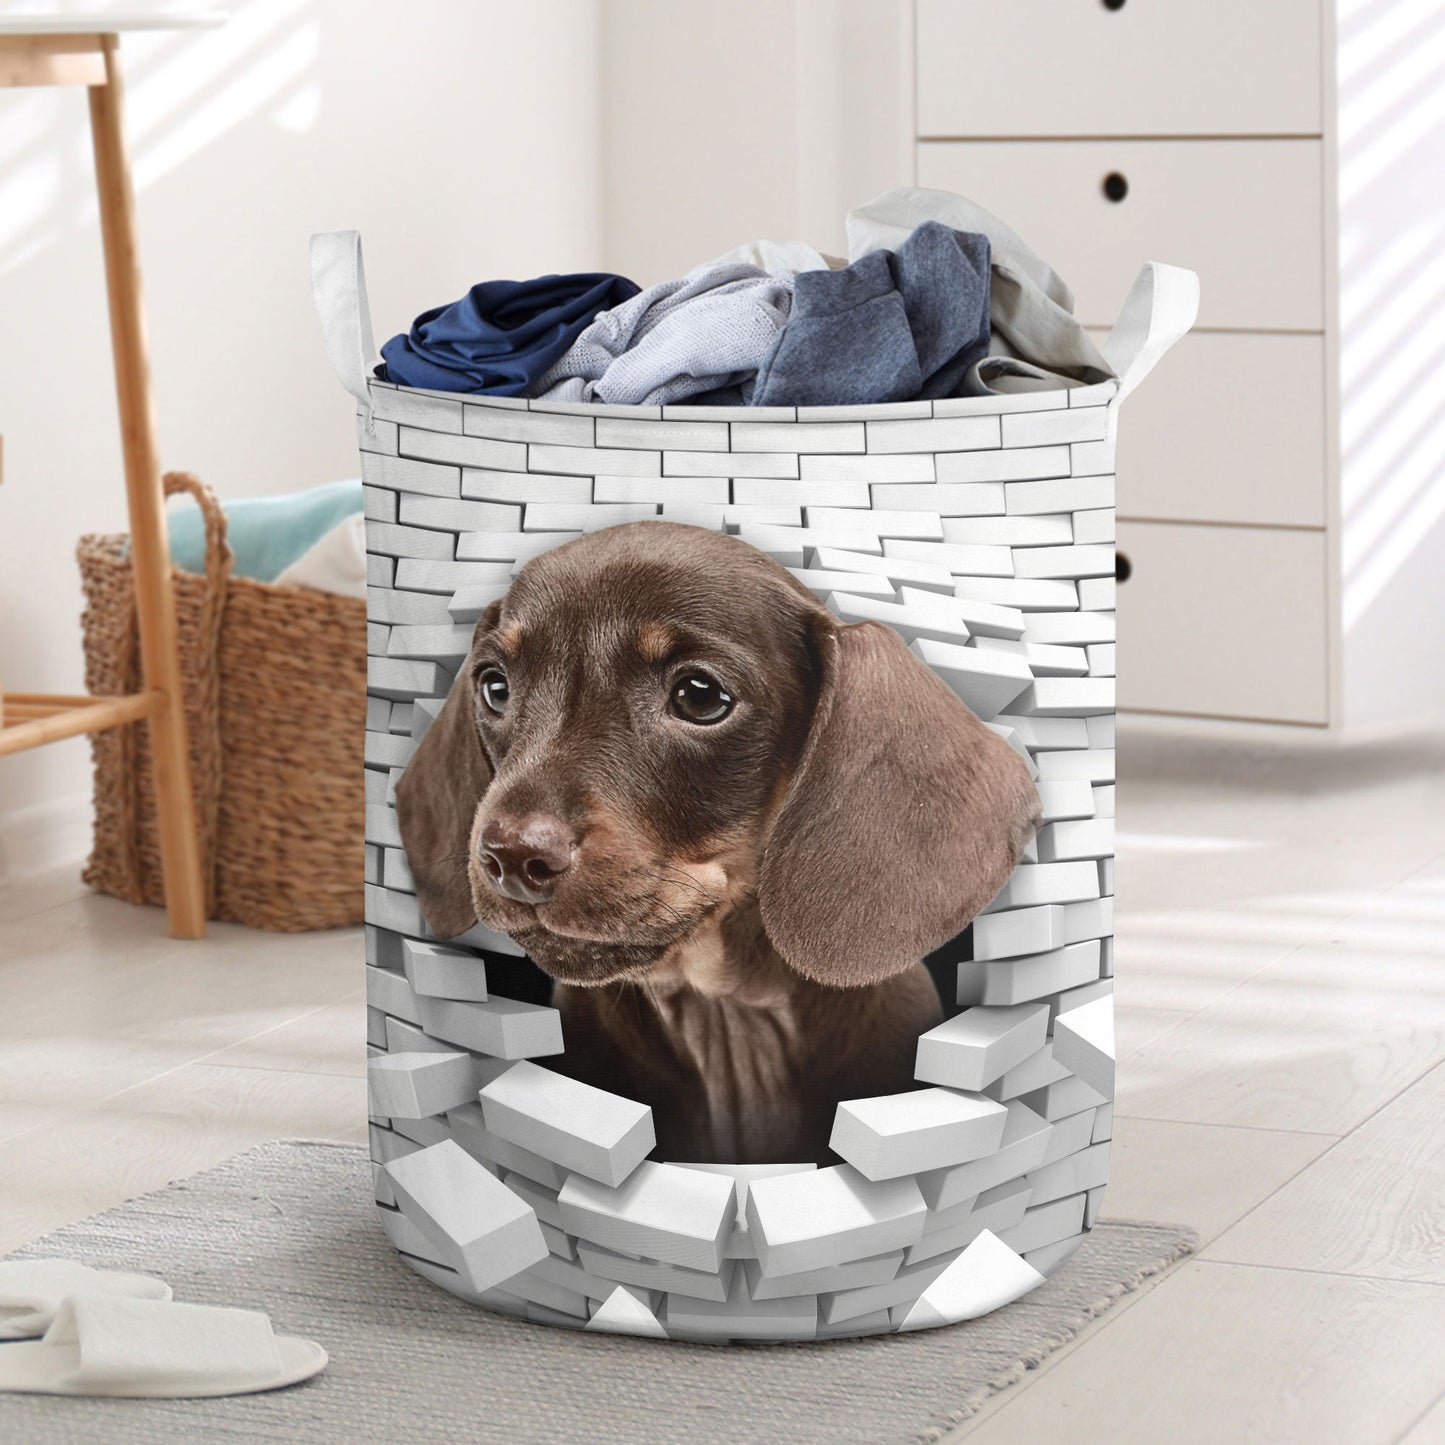 Dachshund - In The Hole Of Wall Pattern Laundry Basket